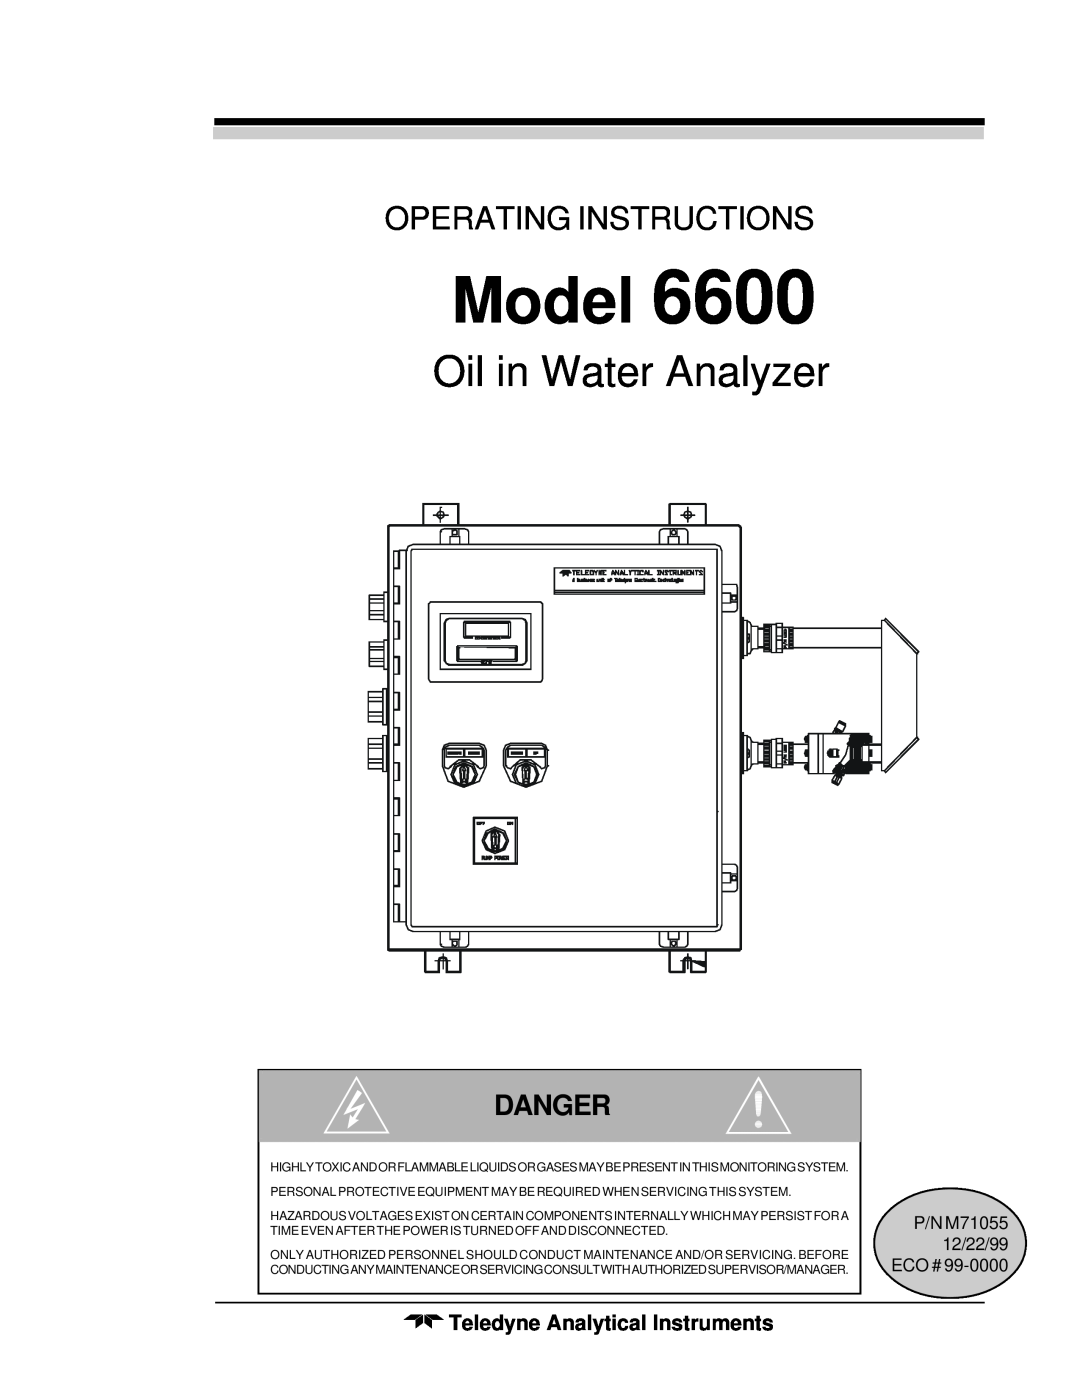 Teledyne 6600 manual Oil in Water Analyzer, Operating Instructions, Danger, Model, Teledyne Analytical Instruments 